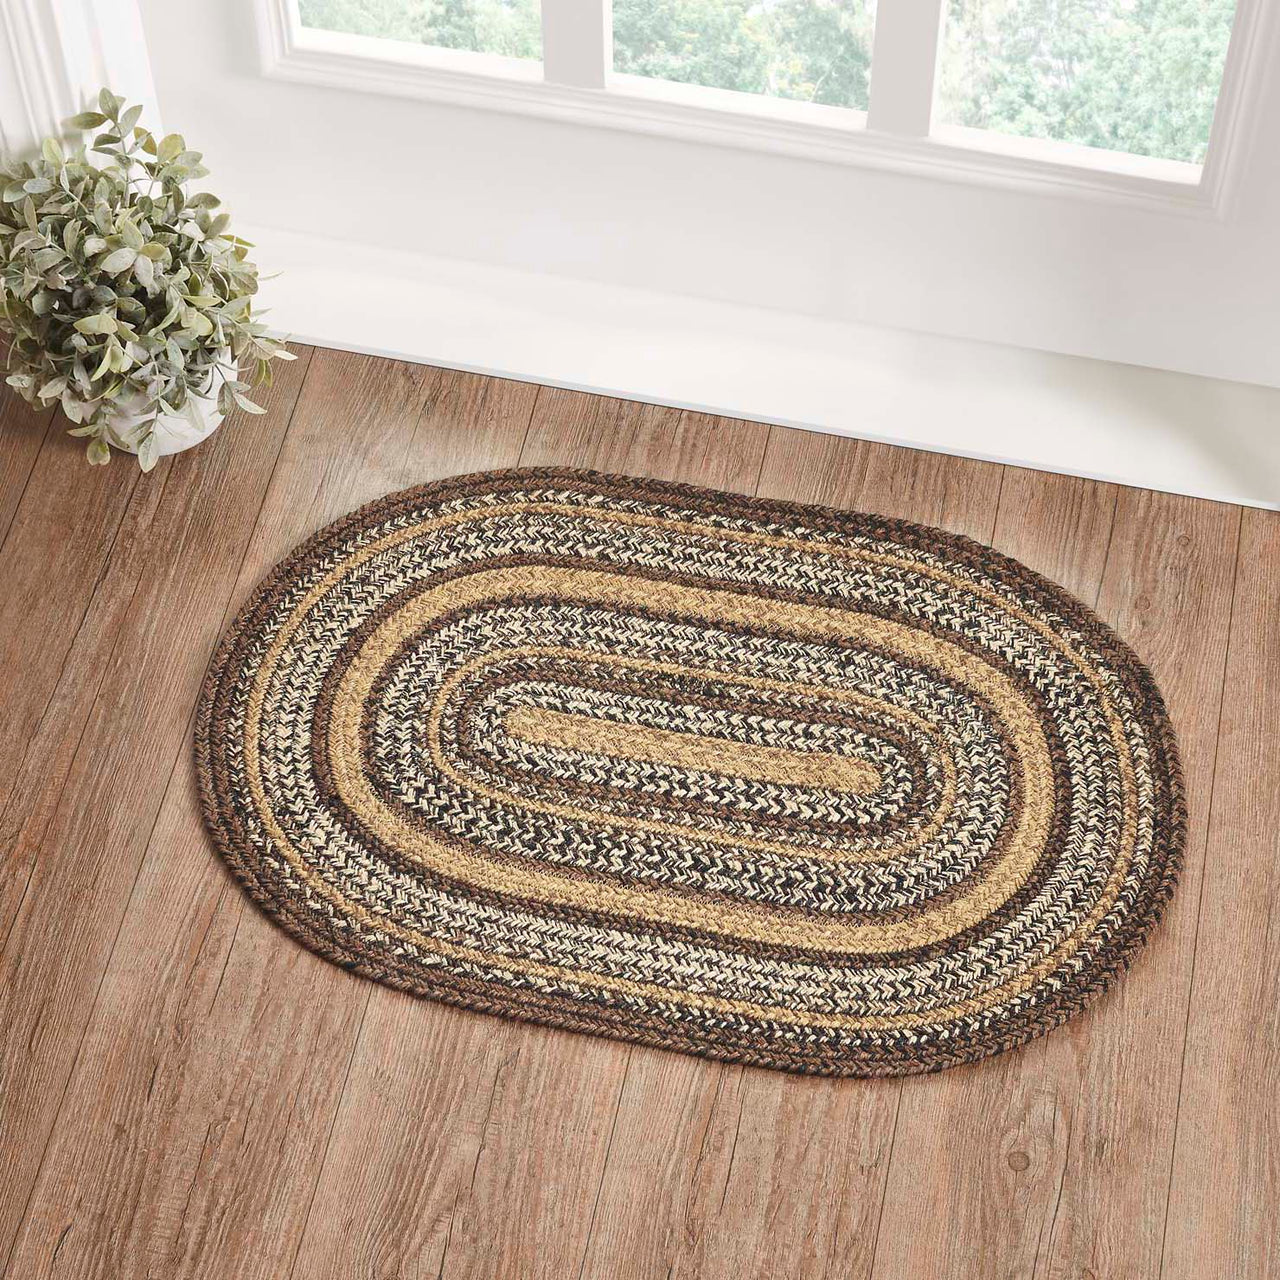 Espresso Jute Braided Rug Oval with Rug Pad 20"x30" VHC Brands